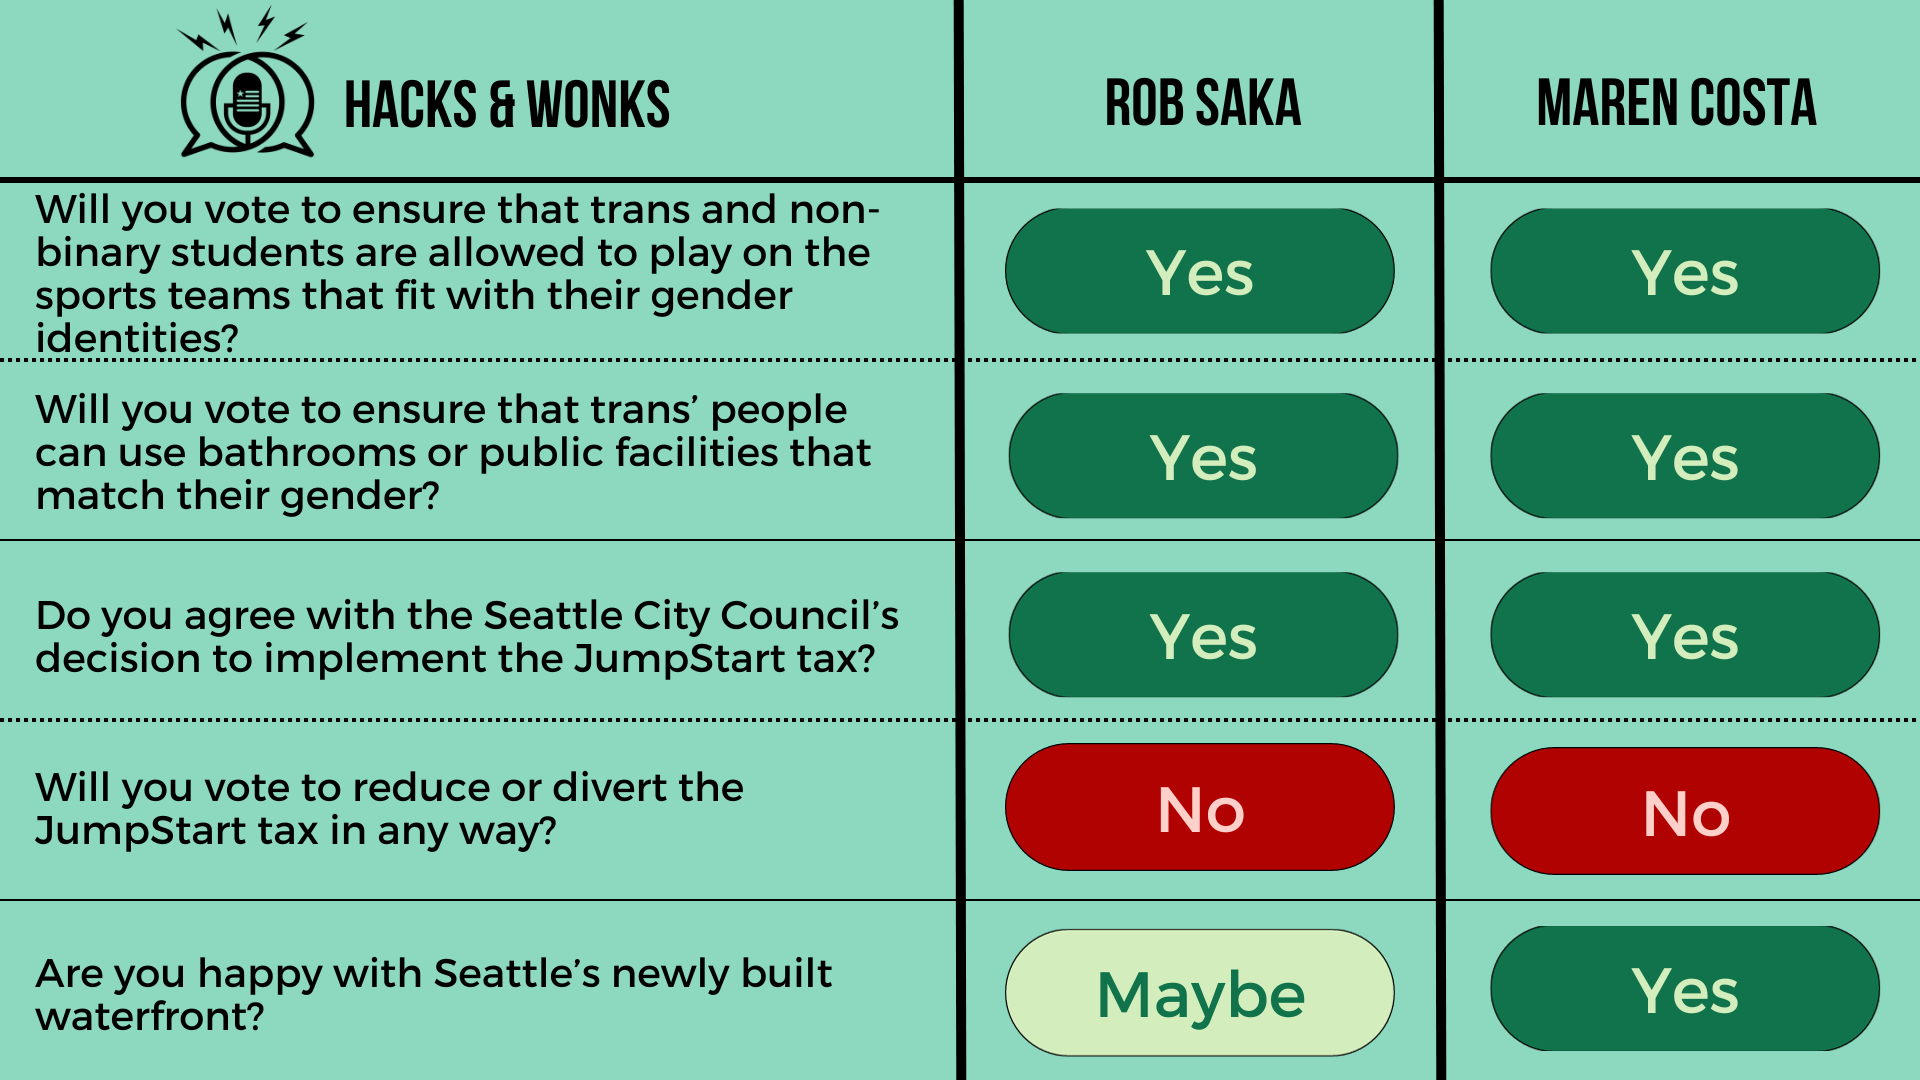 Q: Will you vote to ensure that trans and non-binary students are allowed to play on the sports teams that fit with their gender identities? Rob Saka: Yes, Maren Costa: Yes  Q: Will you vote to ensure that trans’ people can use bathrooms or public fa